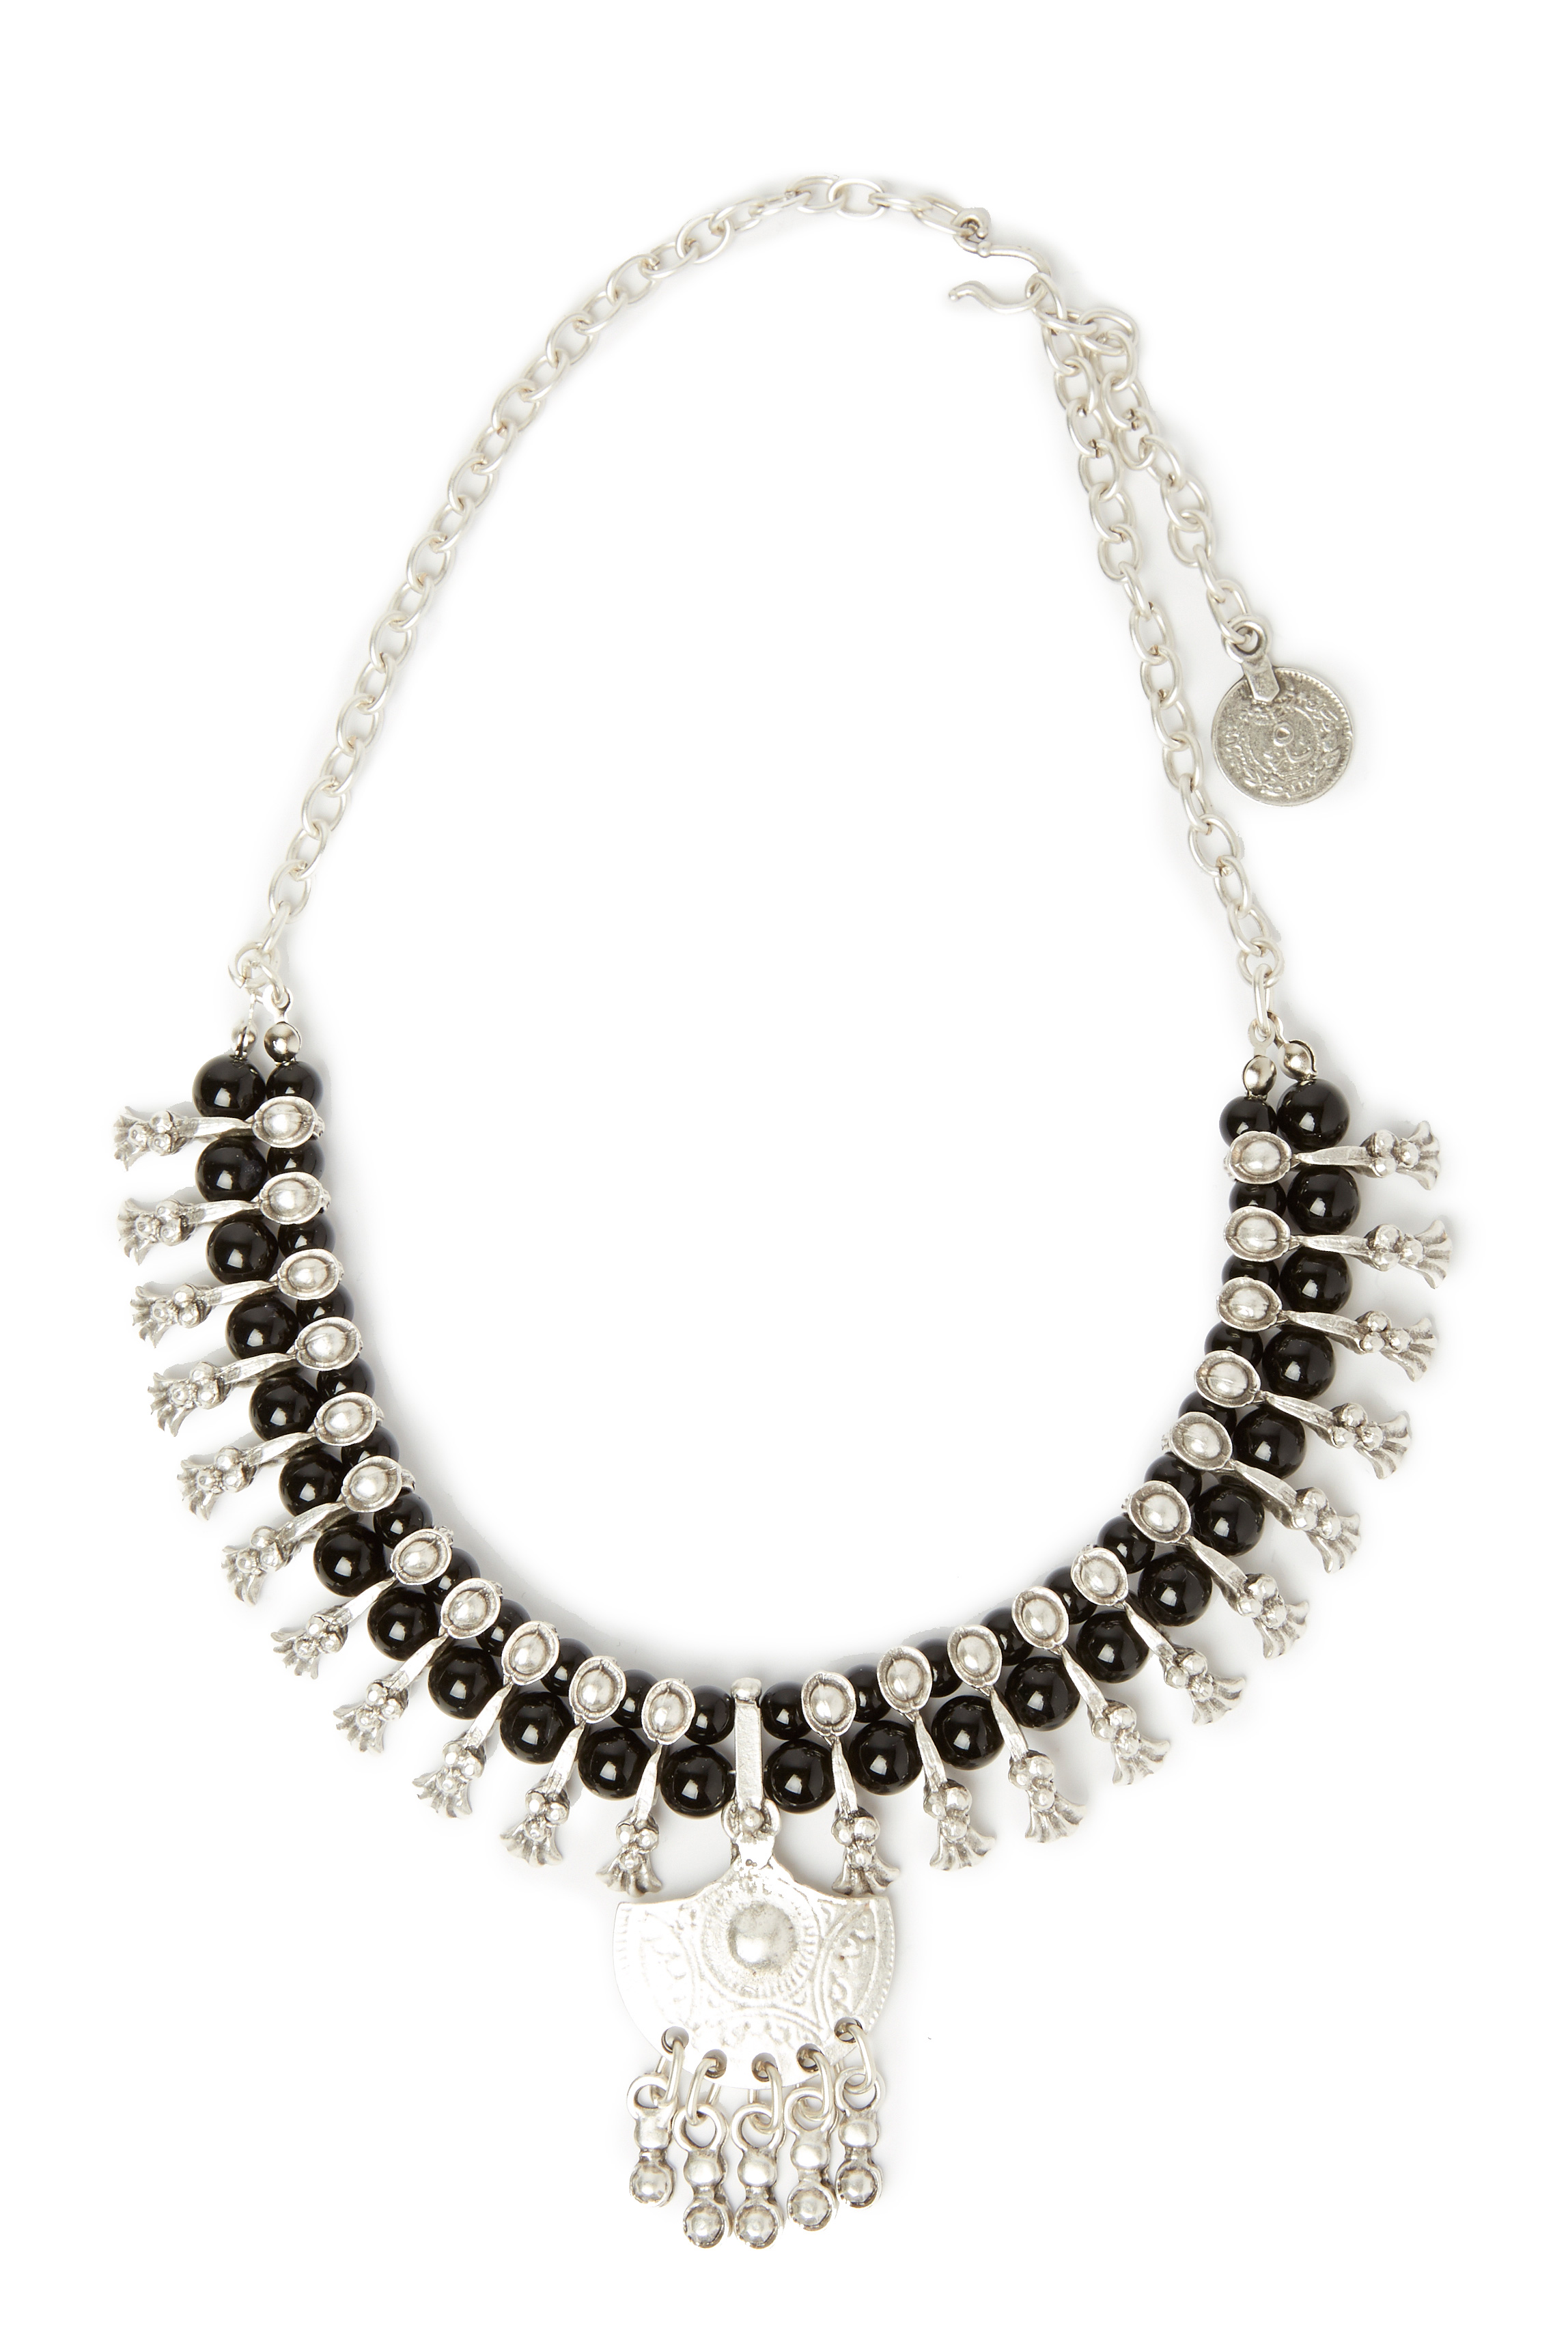 Chanour Structured Flat Beading Necklace